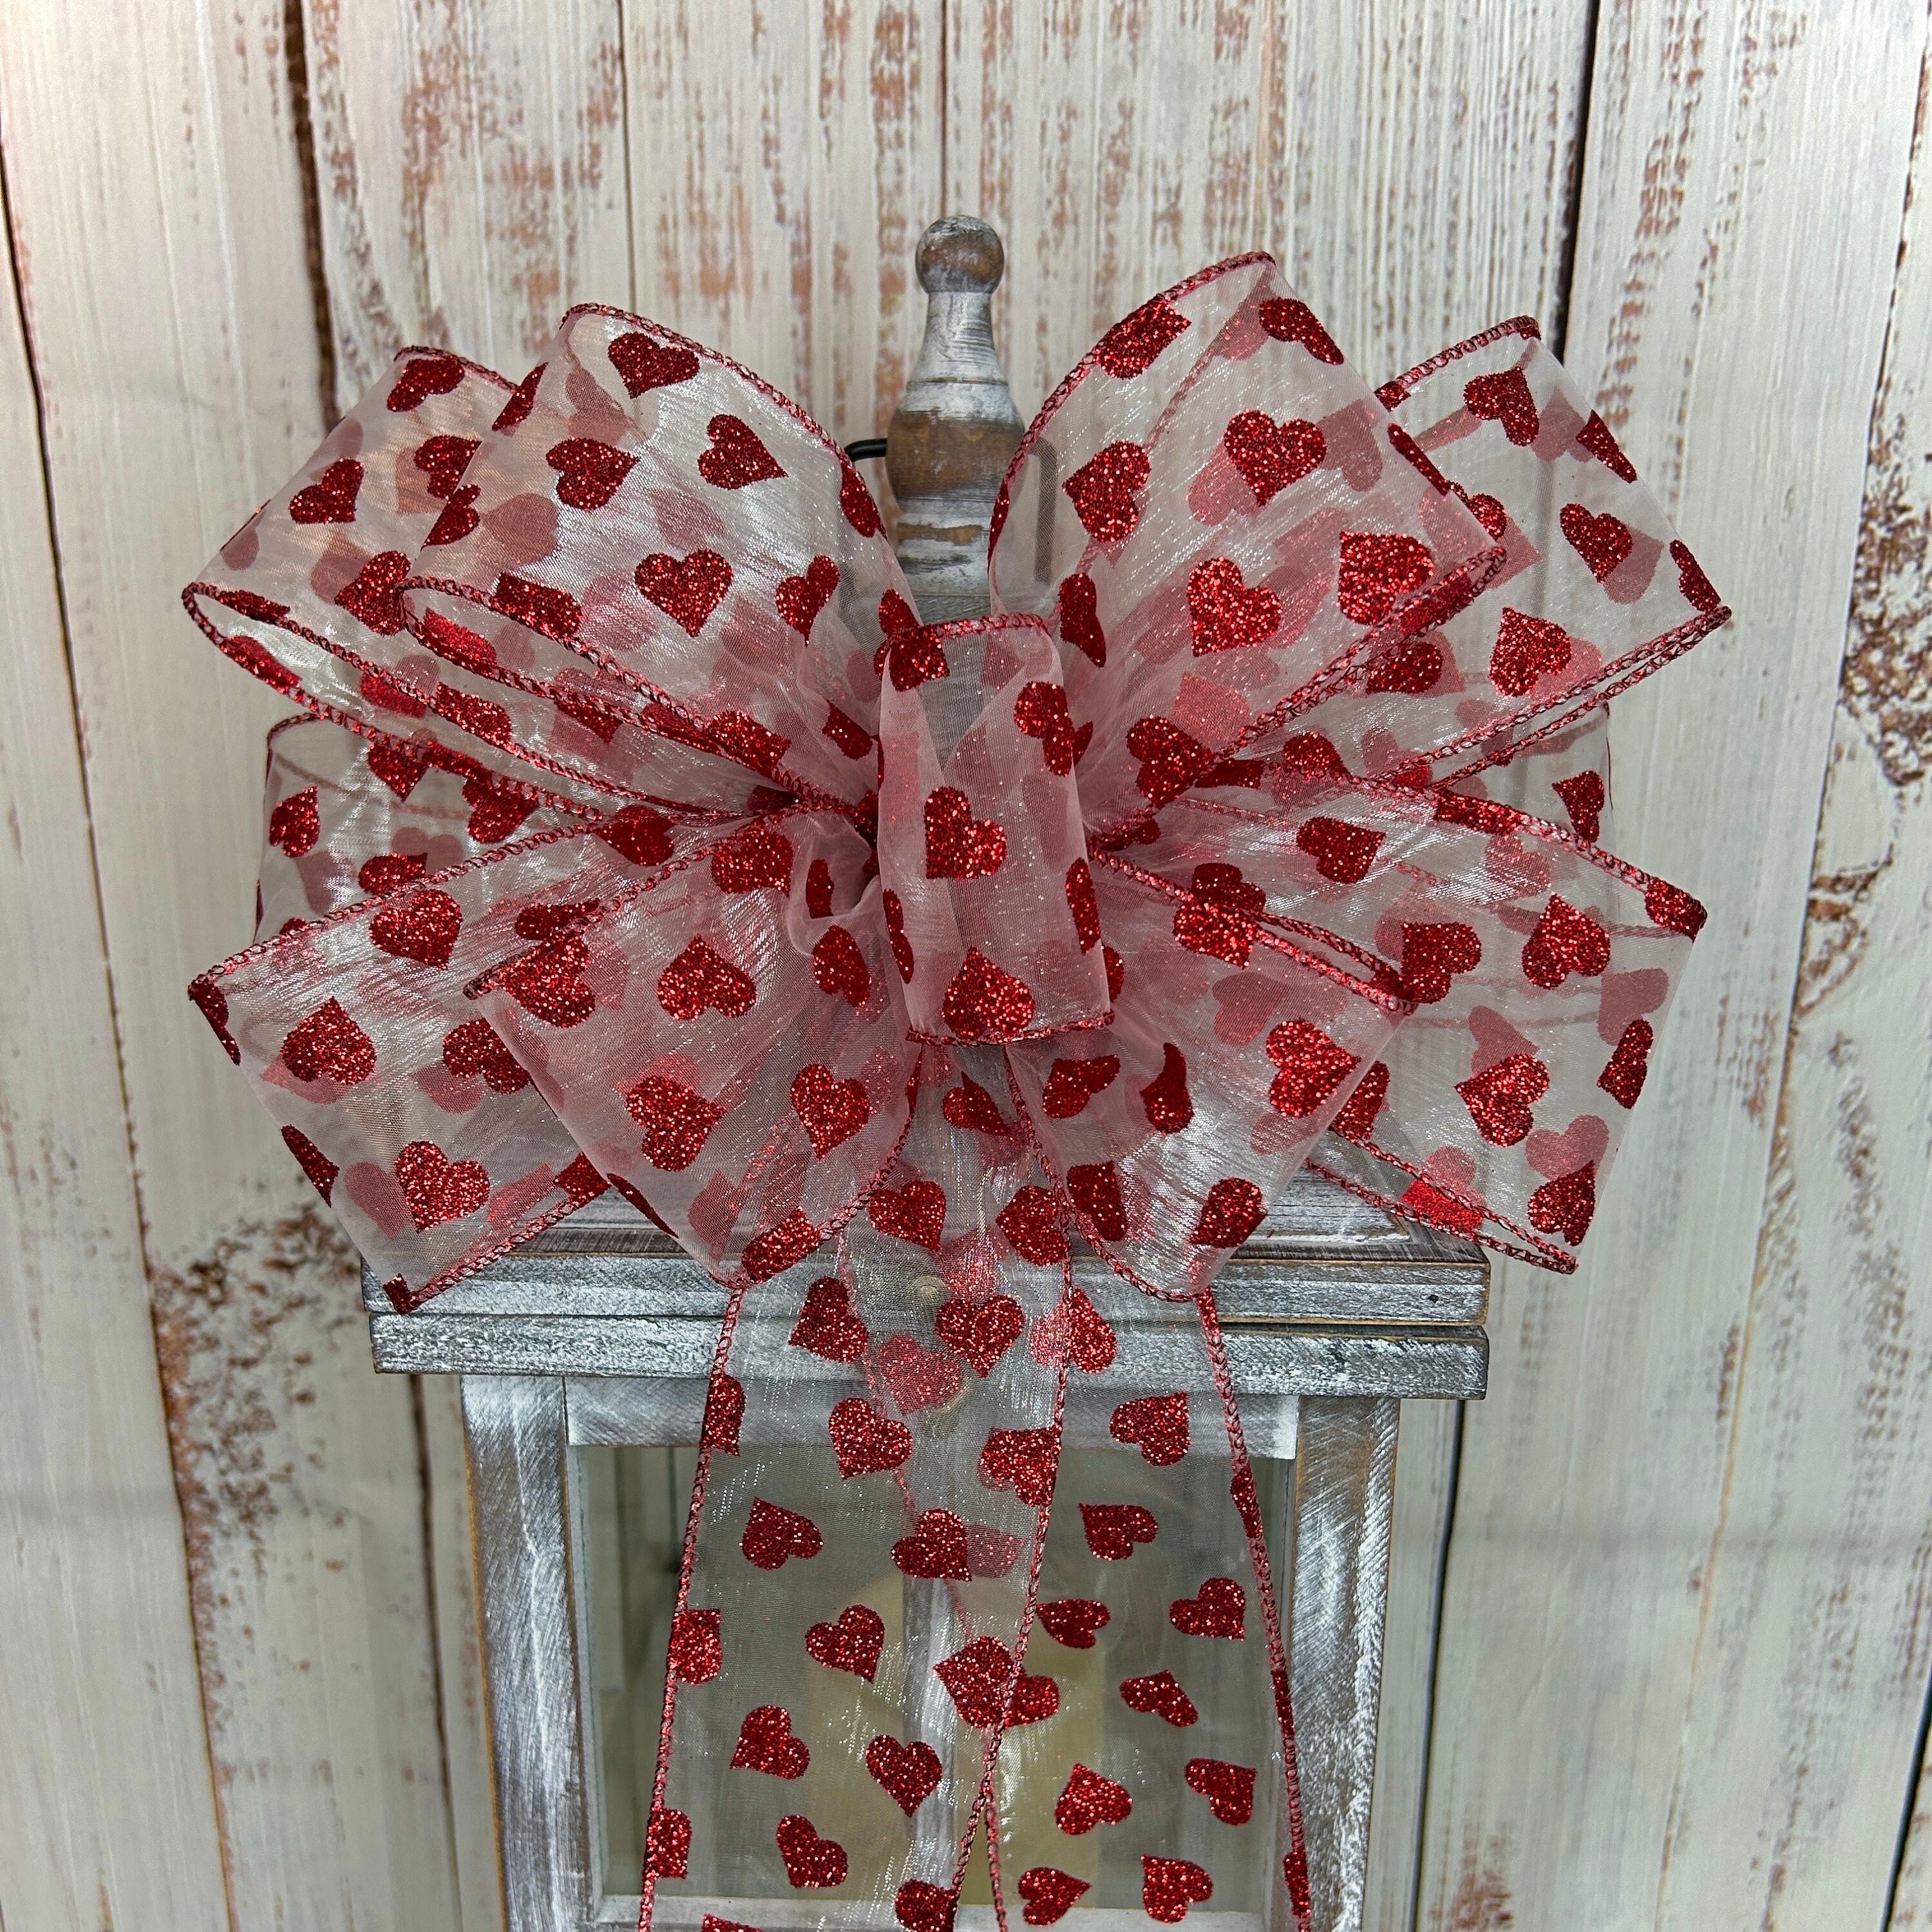 Valentine's Day Bows - Spring Bows - Wired Valentine Candy Hearts Bow 10  Inch